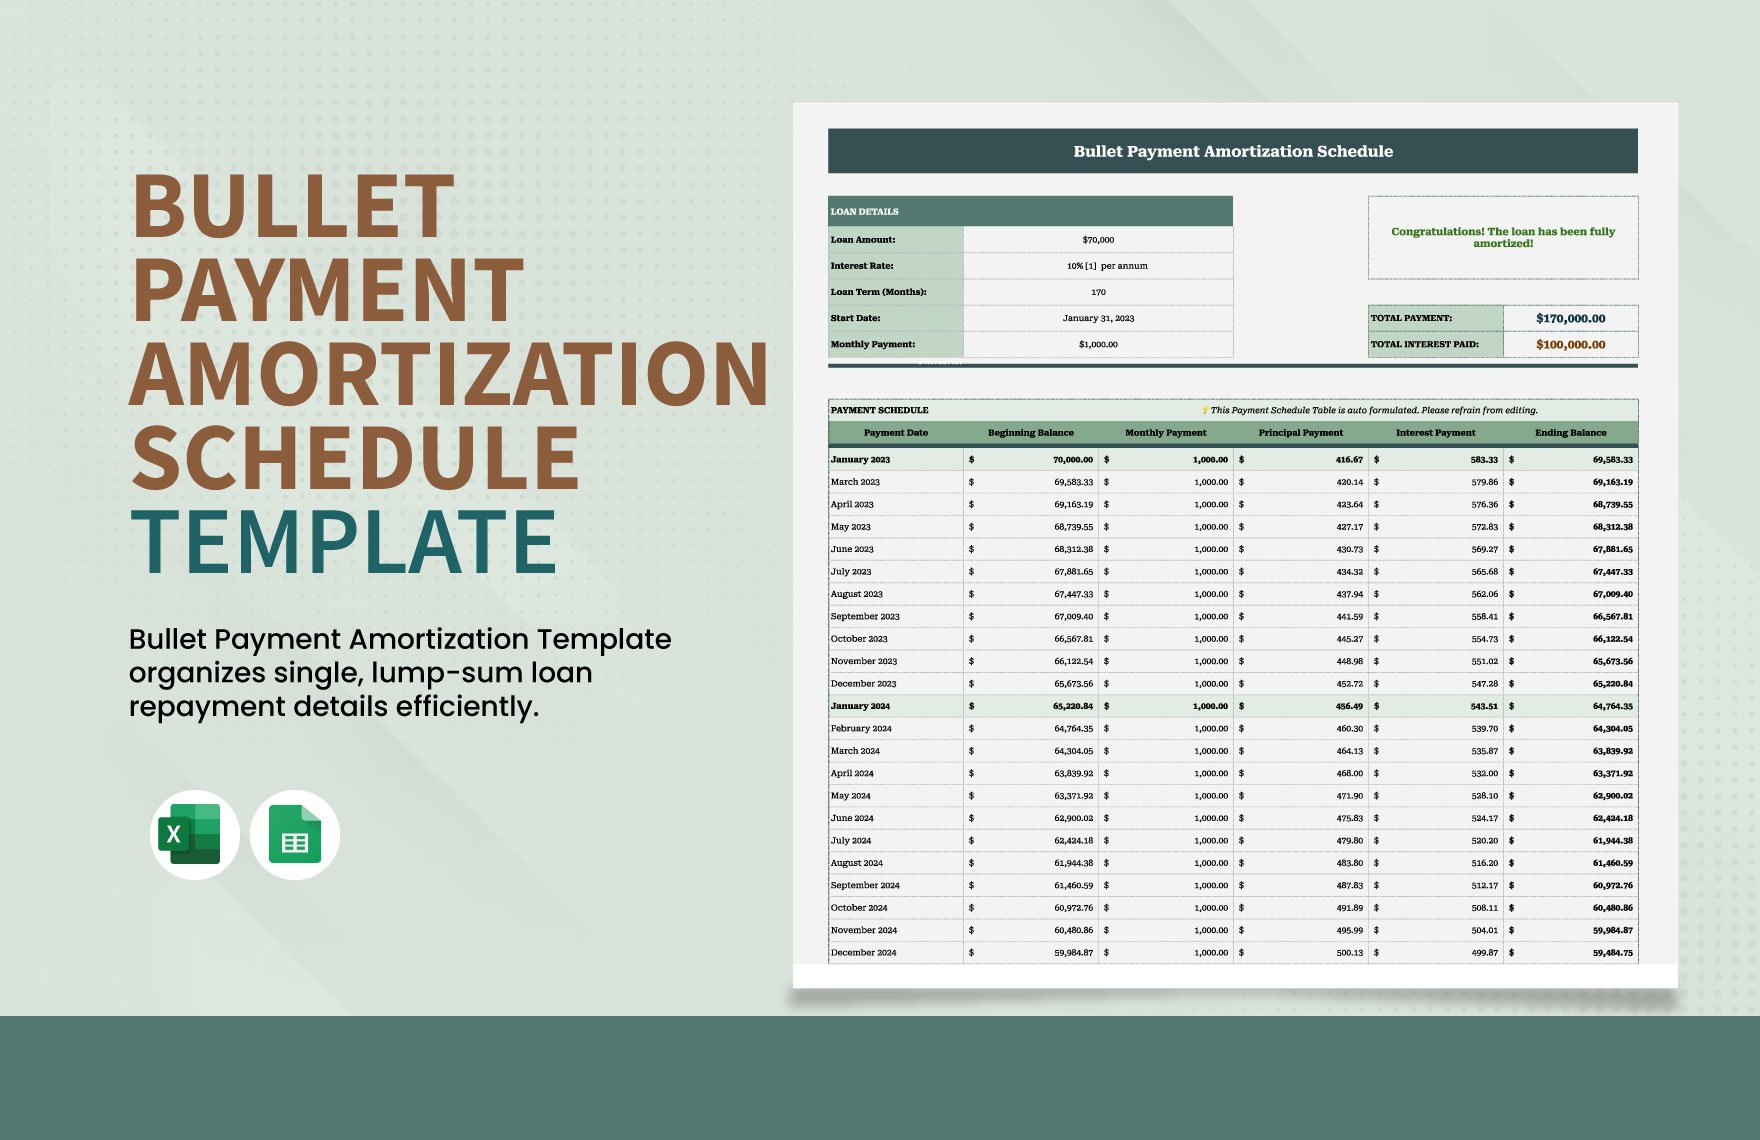 Bullet Payment Amortization Schedule Template in Excel, Google Sheets